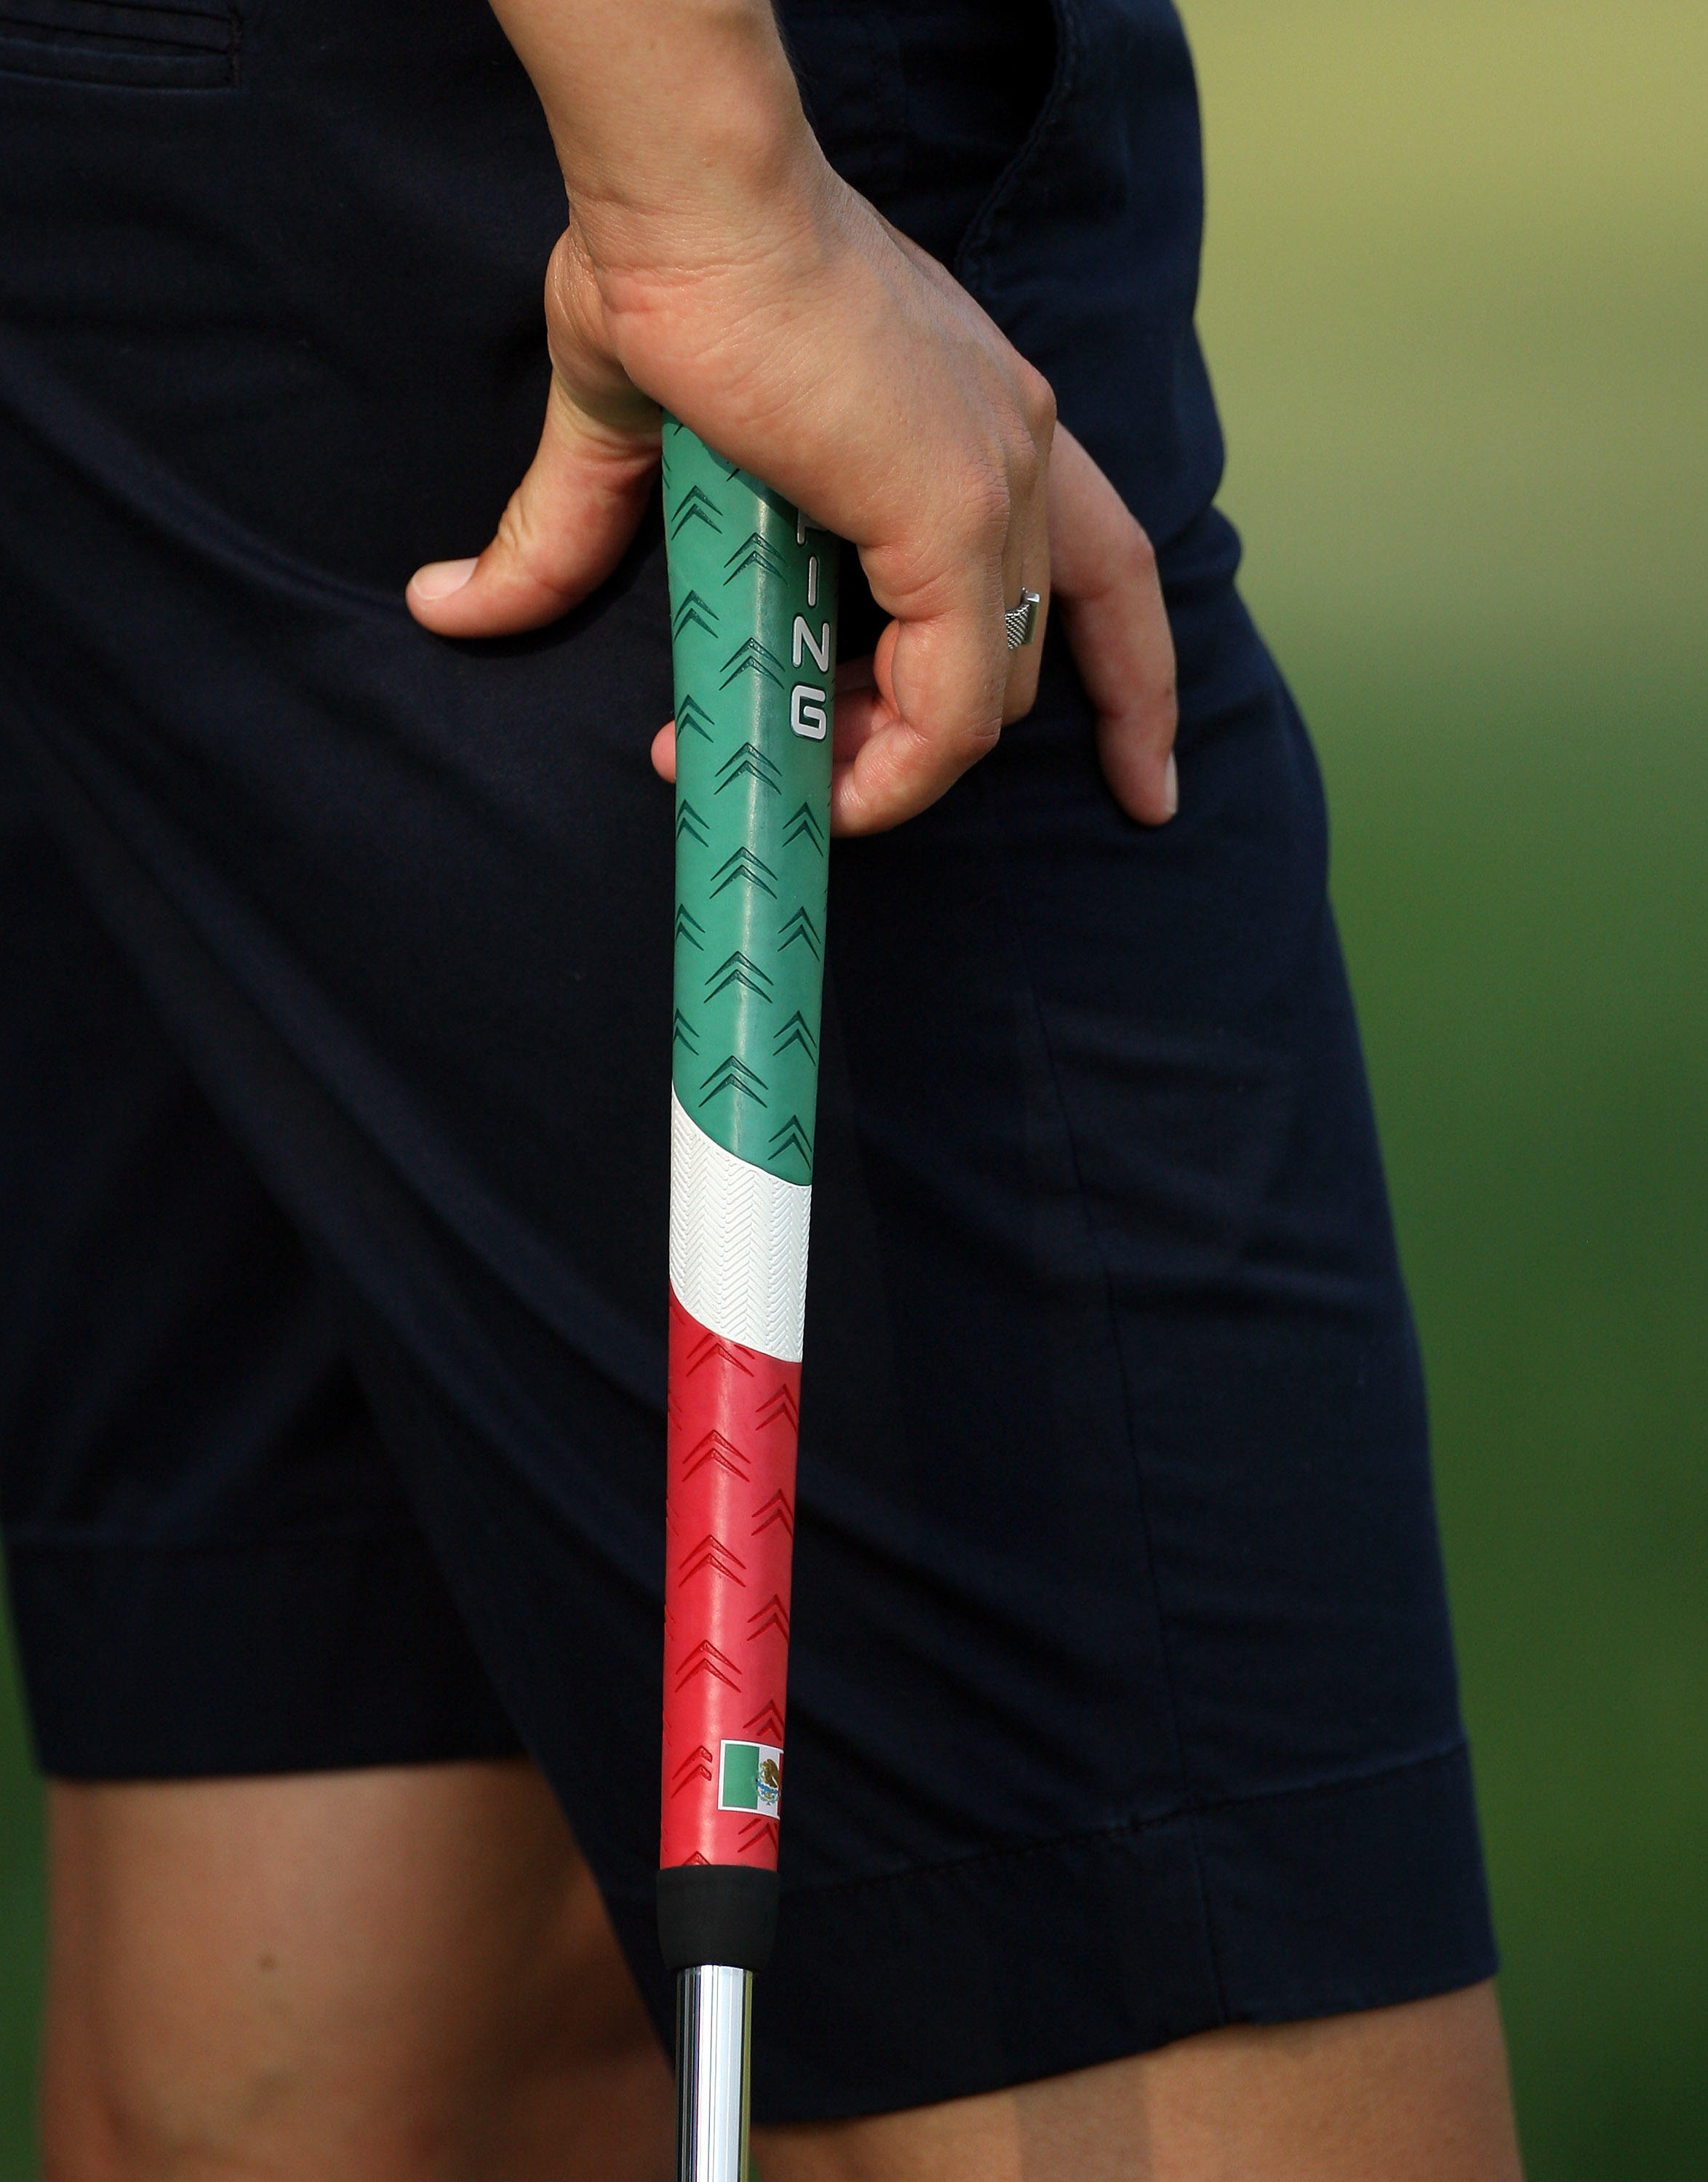 HAVRE DE GRACE, MD - JUNE 08: Lorena Ochoa of Mexico's putter grip at the 15th hole during the final round of the 2008 McDonald's LPGA Championship held at Bulle Rock Golf Course, on June 8, 2008 in Havre de Grace, Maryland. (Photo by David Cannon/Getty I